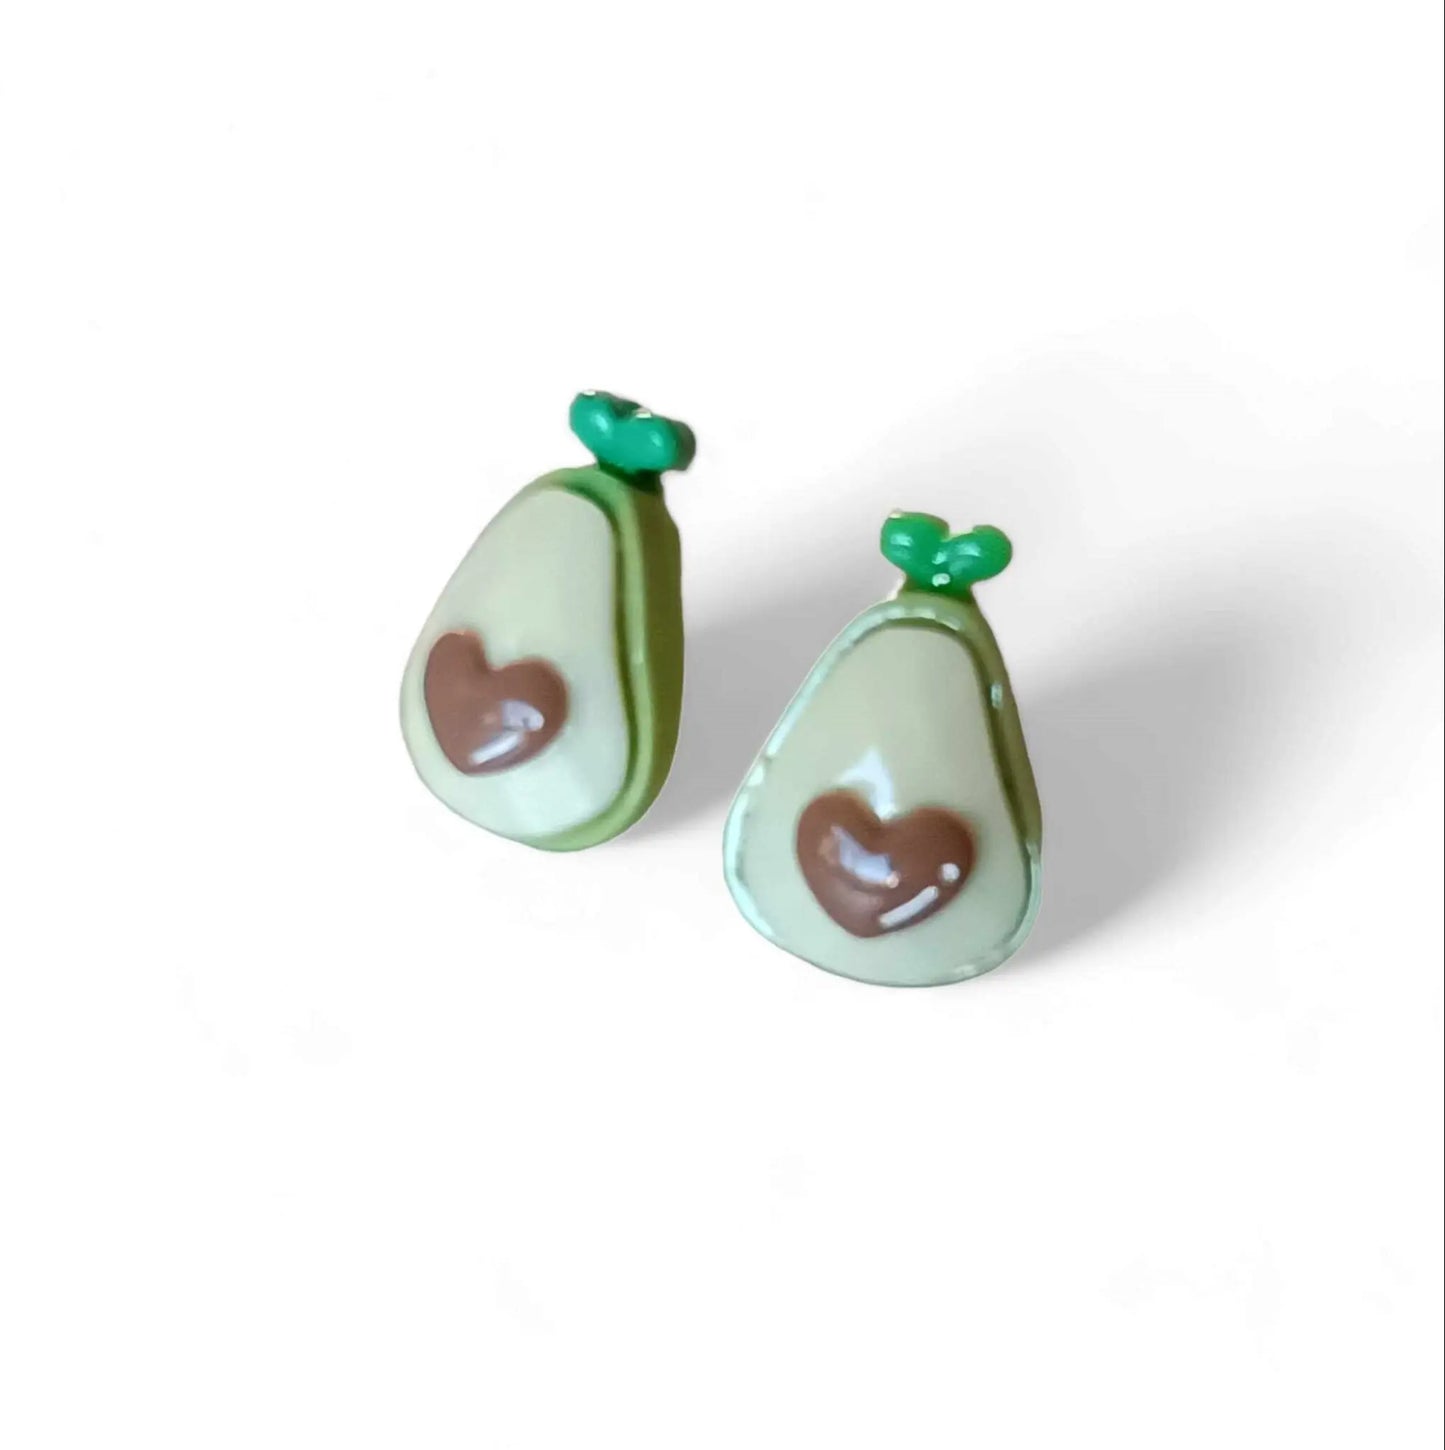 Unique Resin Avocado Earrings: A Perfect Blend of Style and Fun